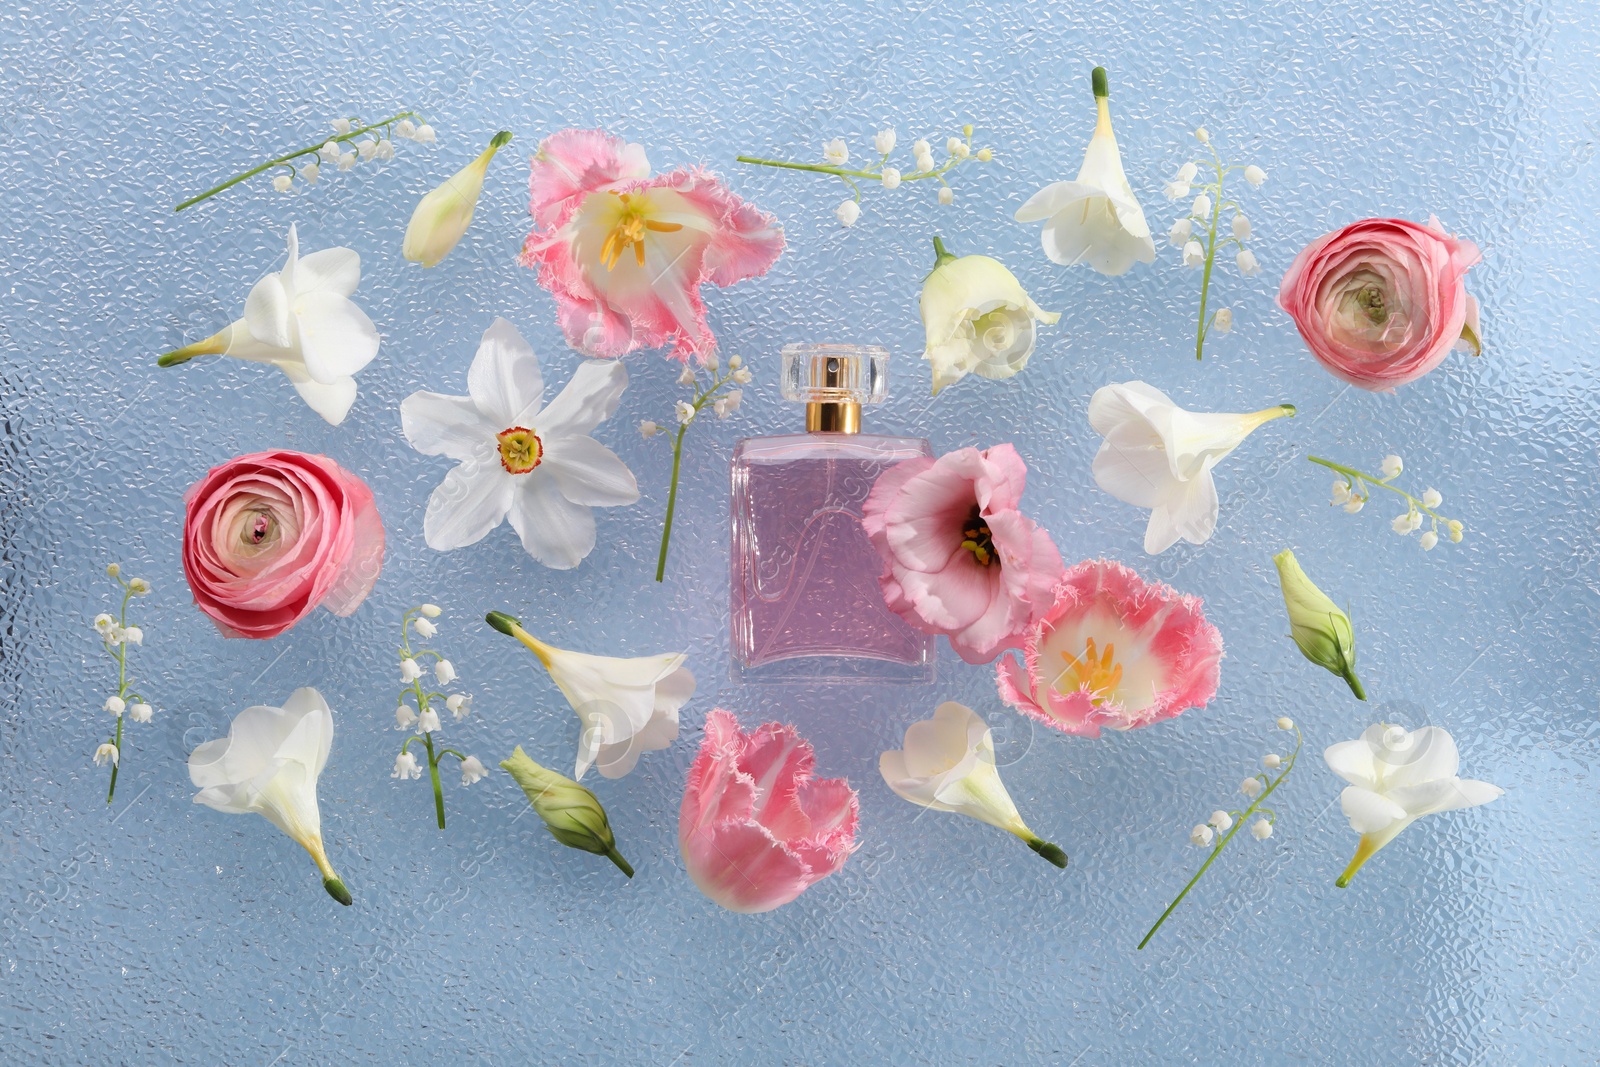 Photo of Luxury perfume and floral decor on light blue plastic surface, flat lay